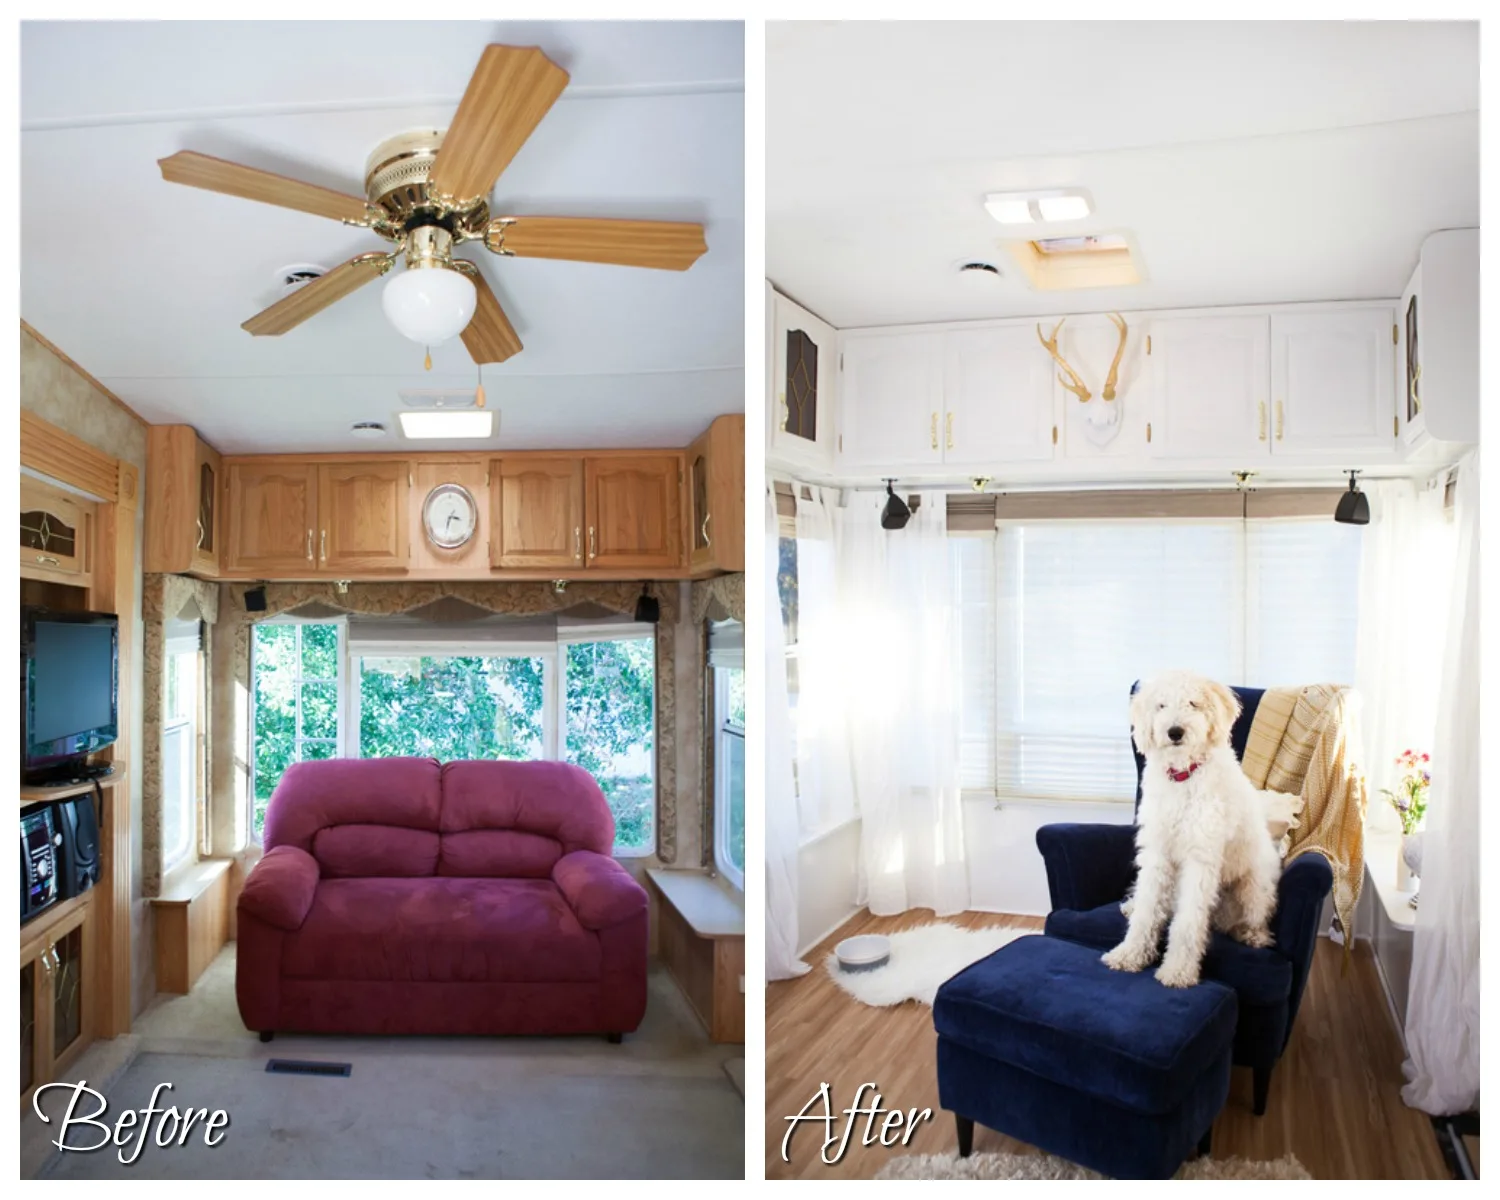 RVObsession - Fifth Wheel Renovations - Chelsea and Ryan have built a delightful home from this fifth wheel camper with somewhat tired decor.